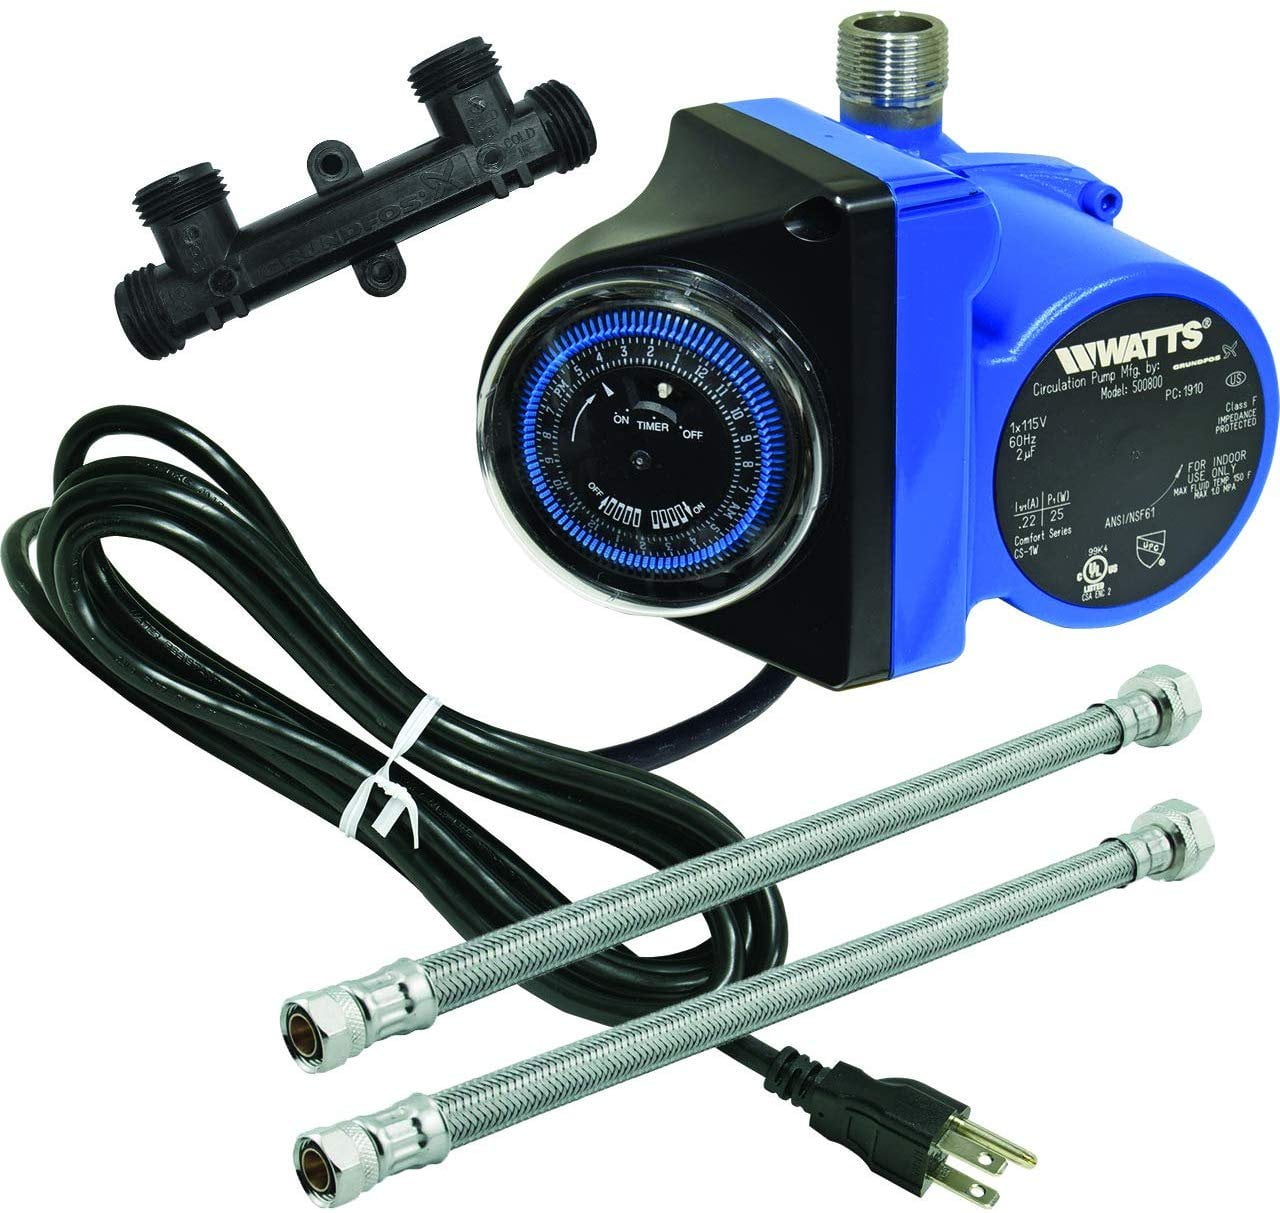 Watts 500800 Premier Instant Hot Water Recirculating Pump System with Timer 